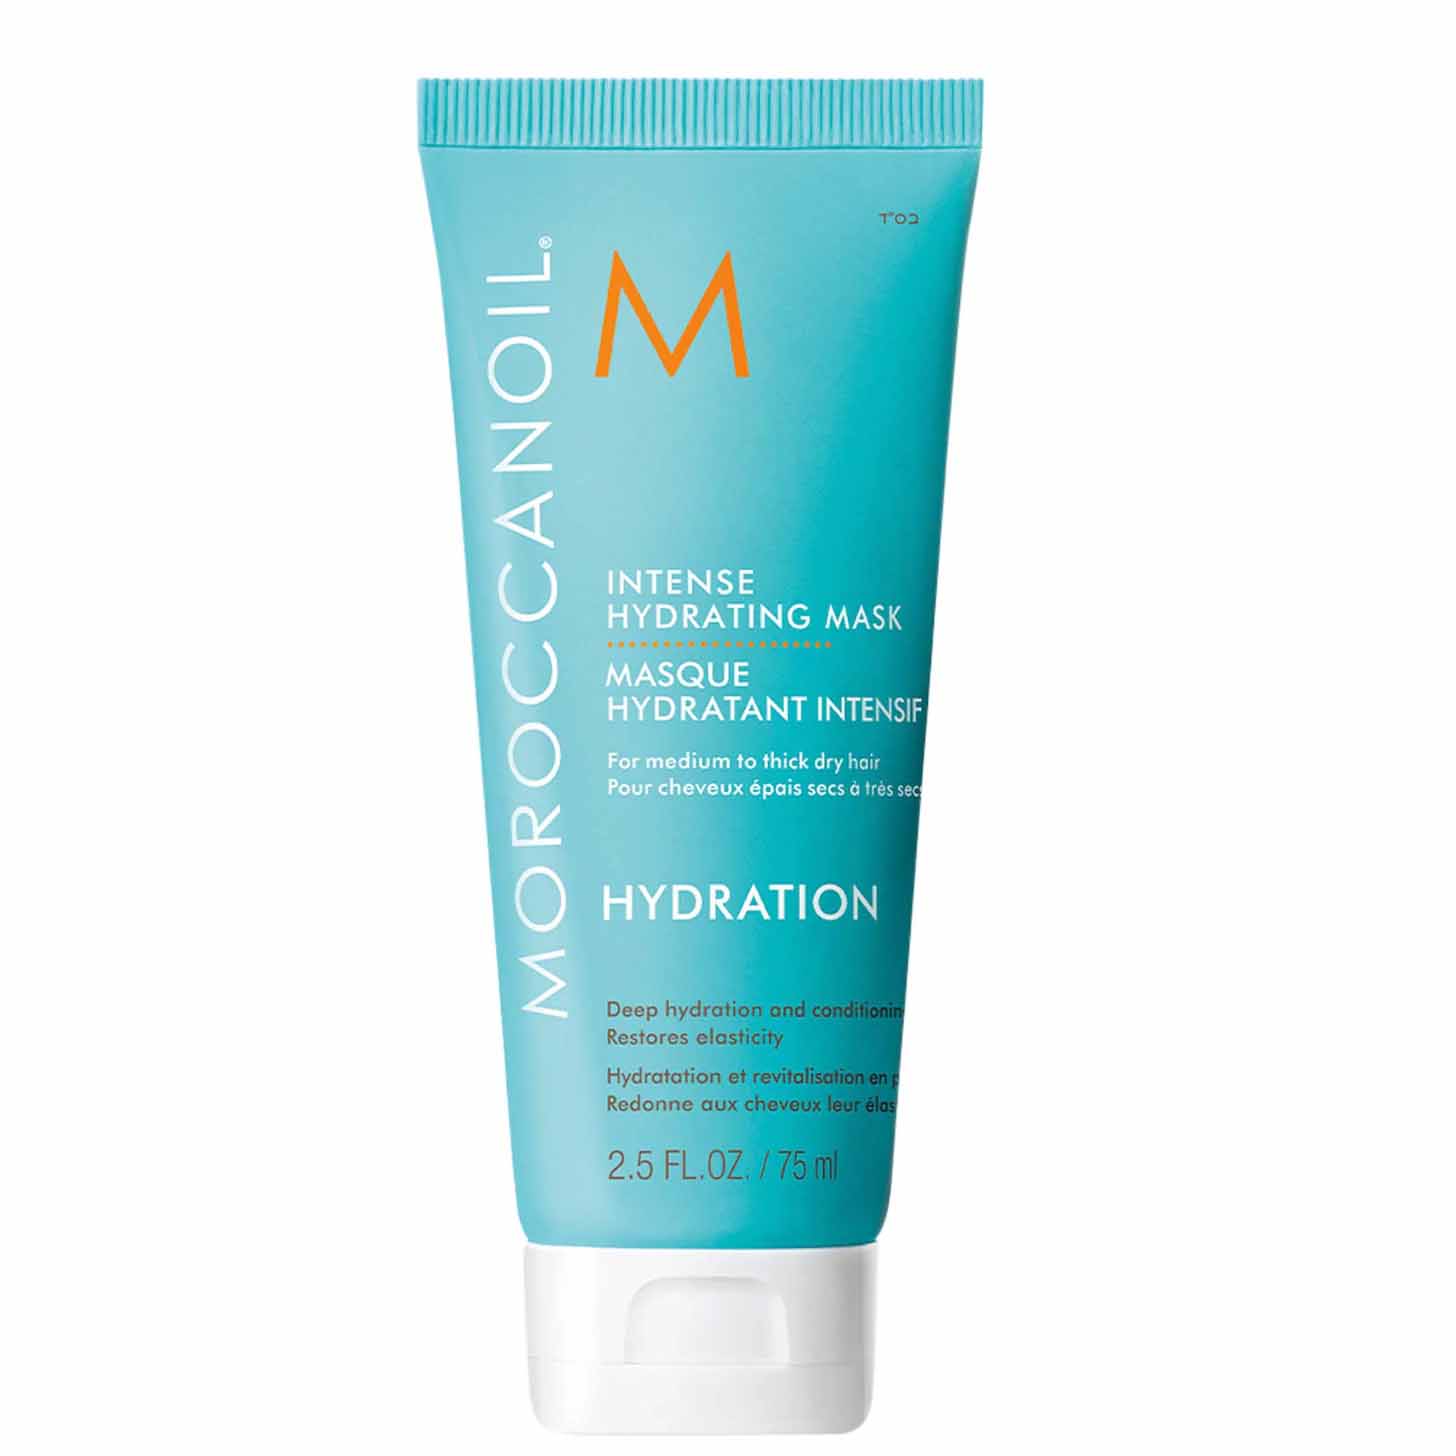 Moroccanoil Intense Hydrating Mask in blue and white bottle 